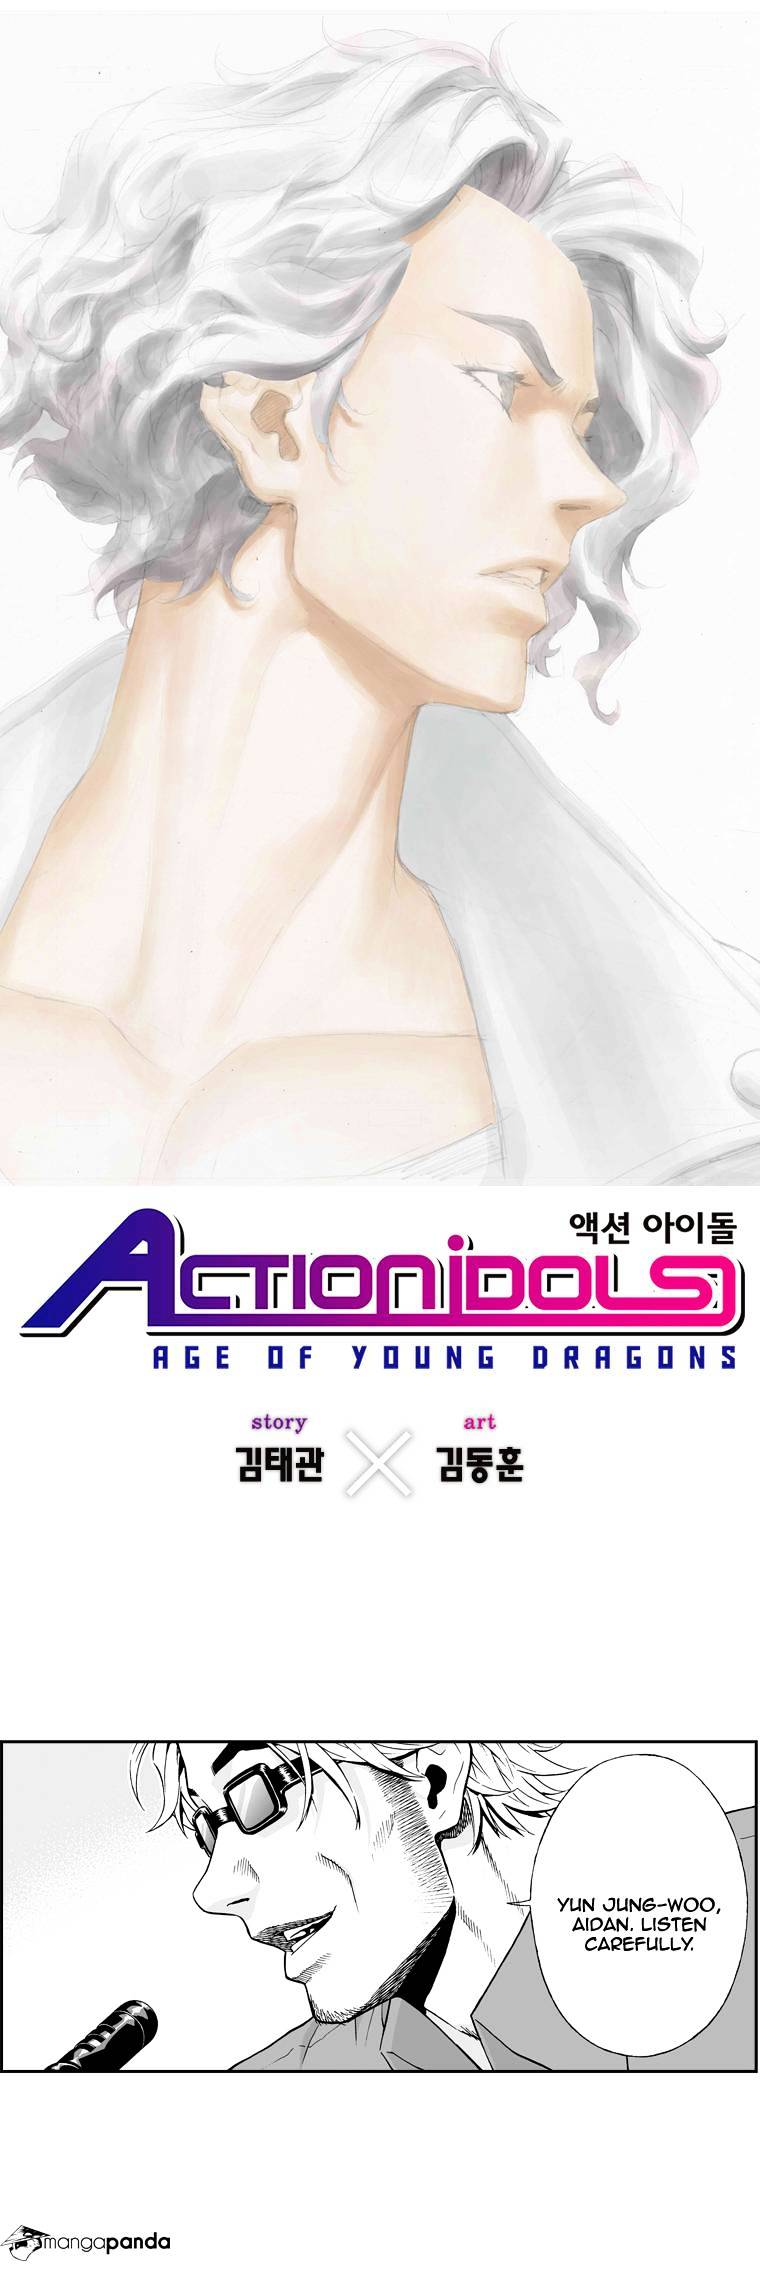 Action Idols - Age Of Young Dragons Chapter 12 #2